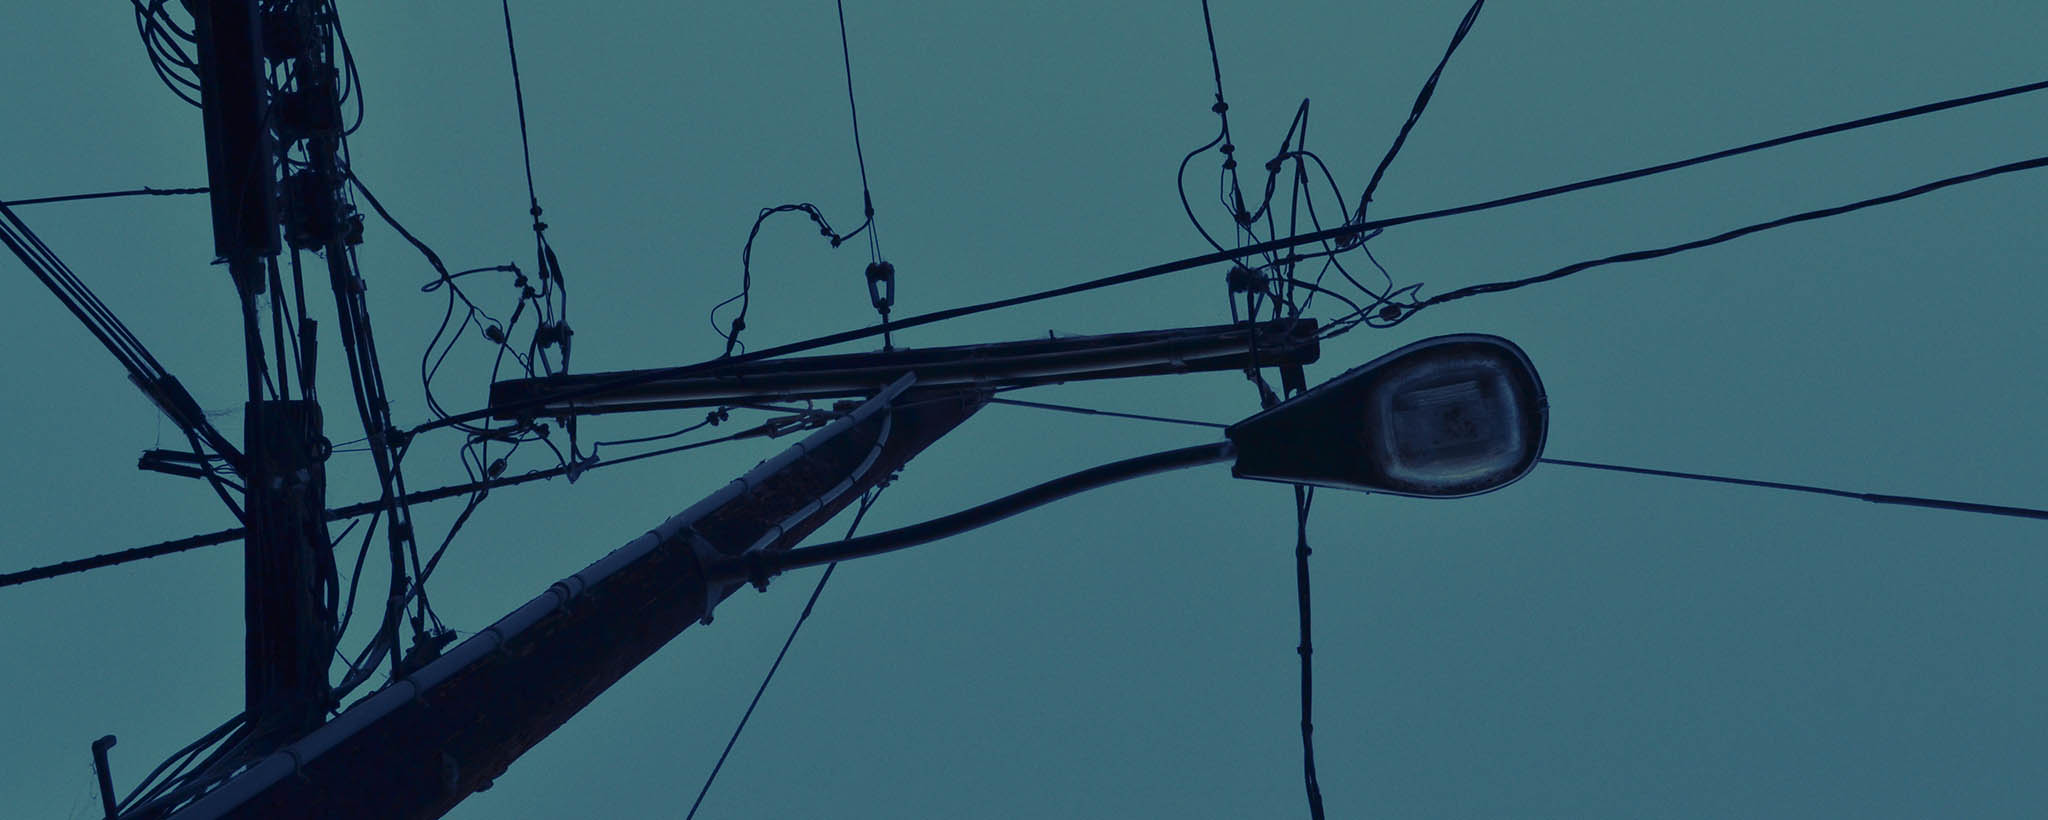 Power Outage Safety  Central Electric Cooperative